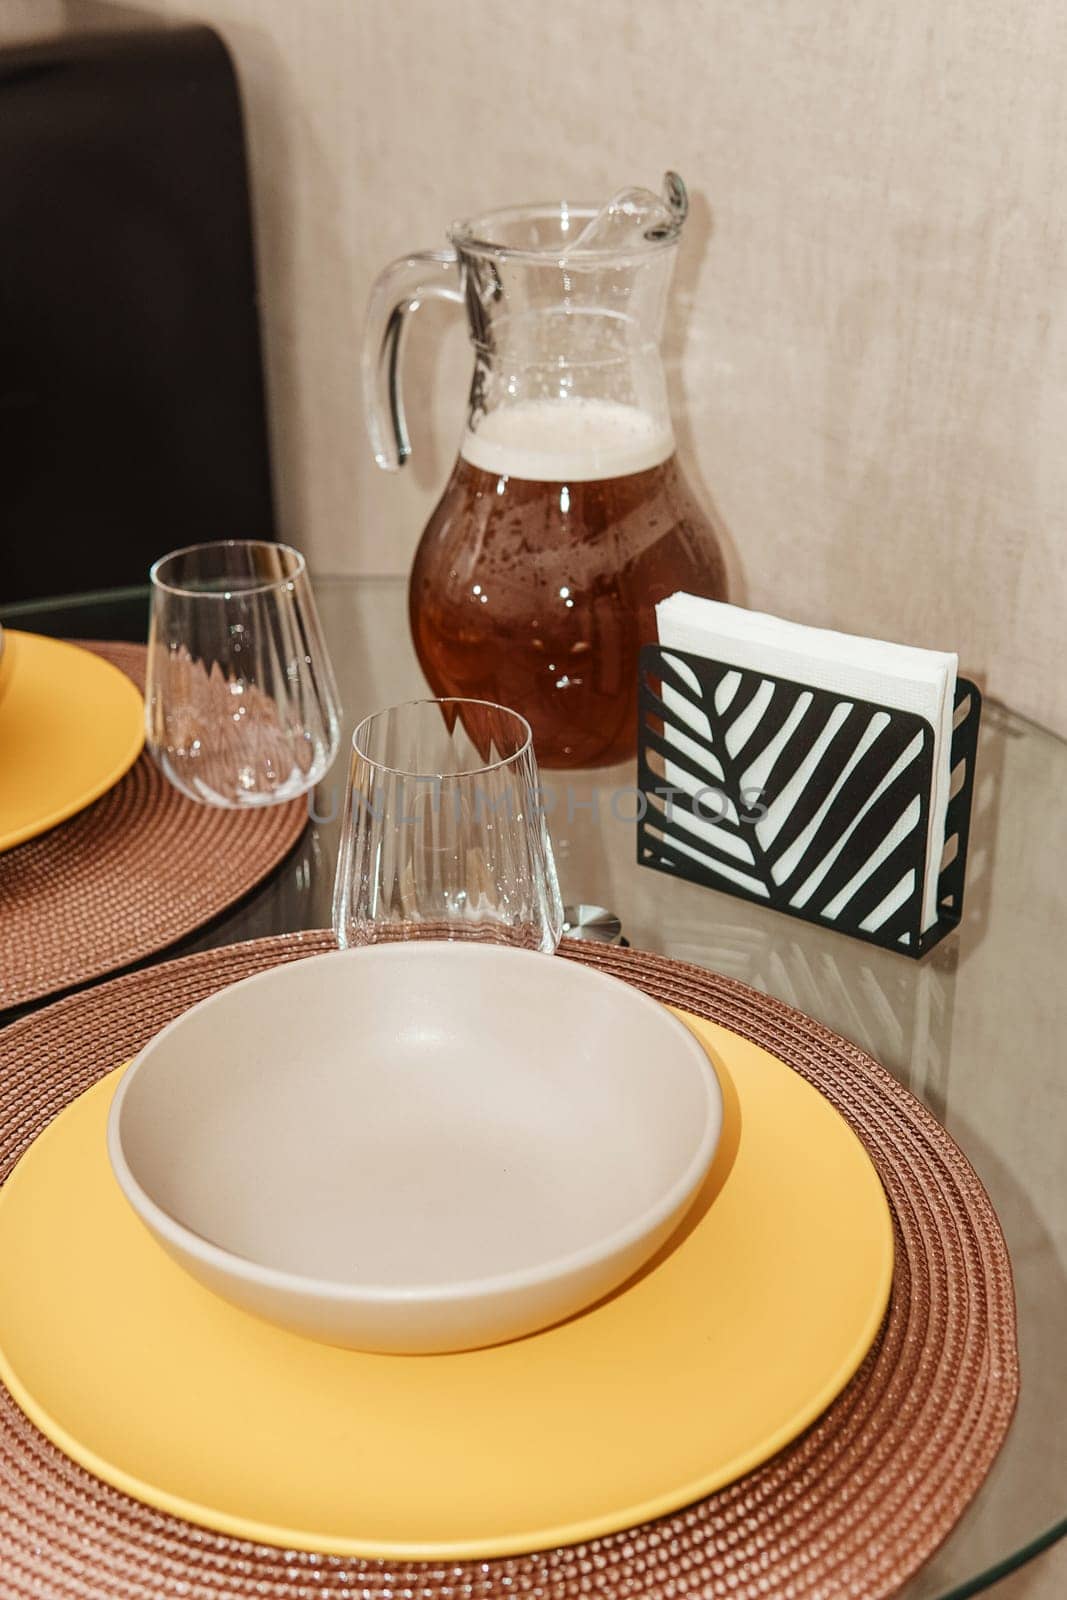 Kitchen table setting, kitchen interior details in natural tones